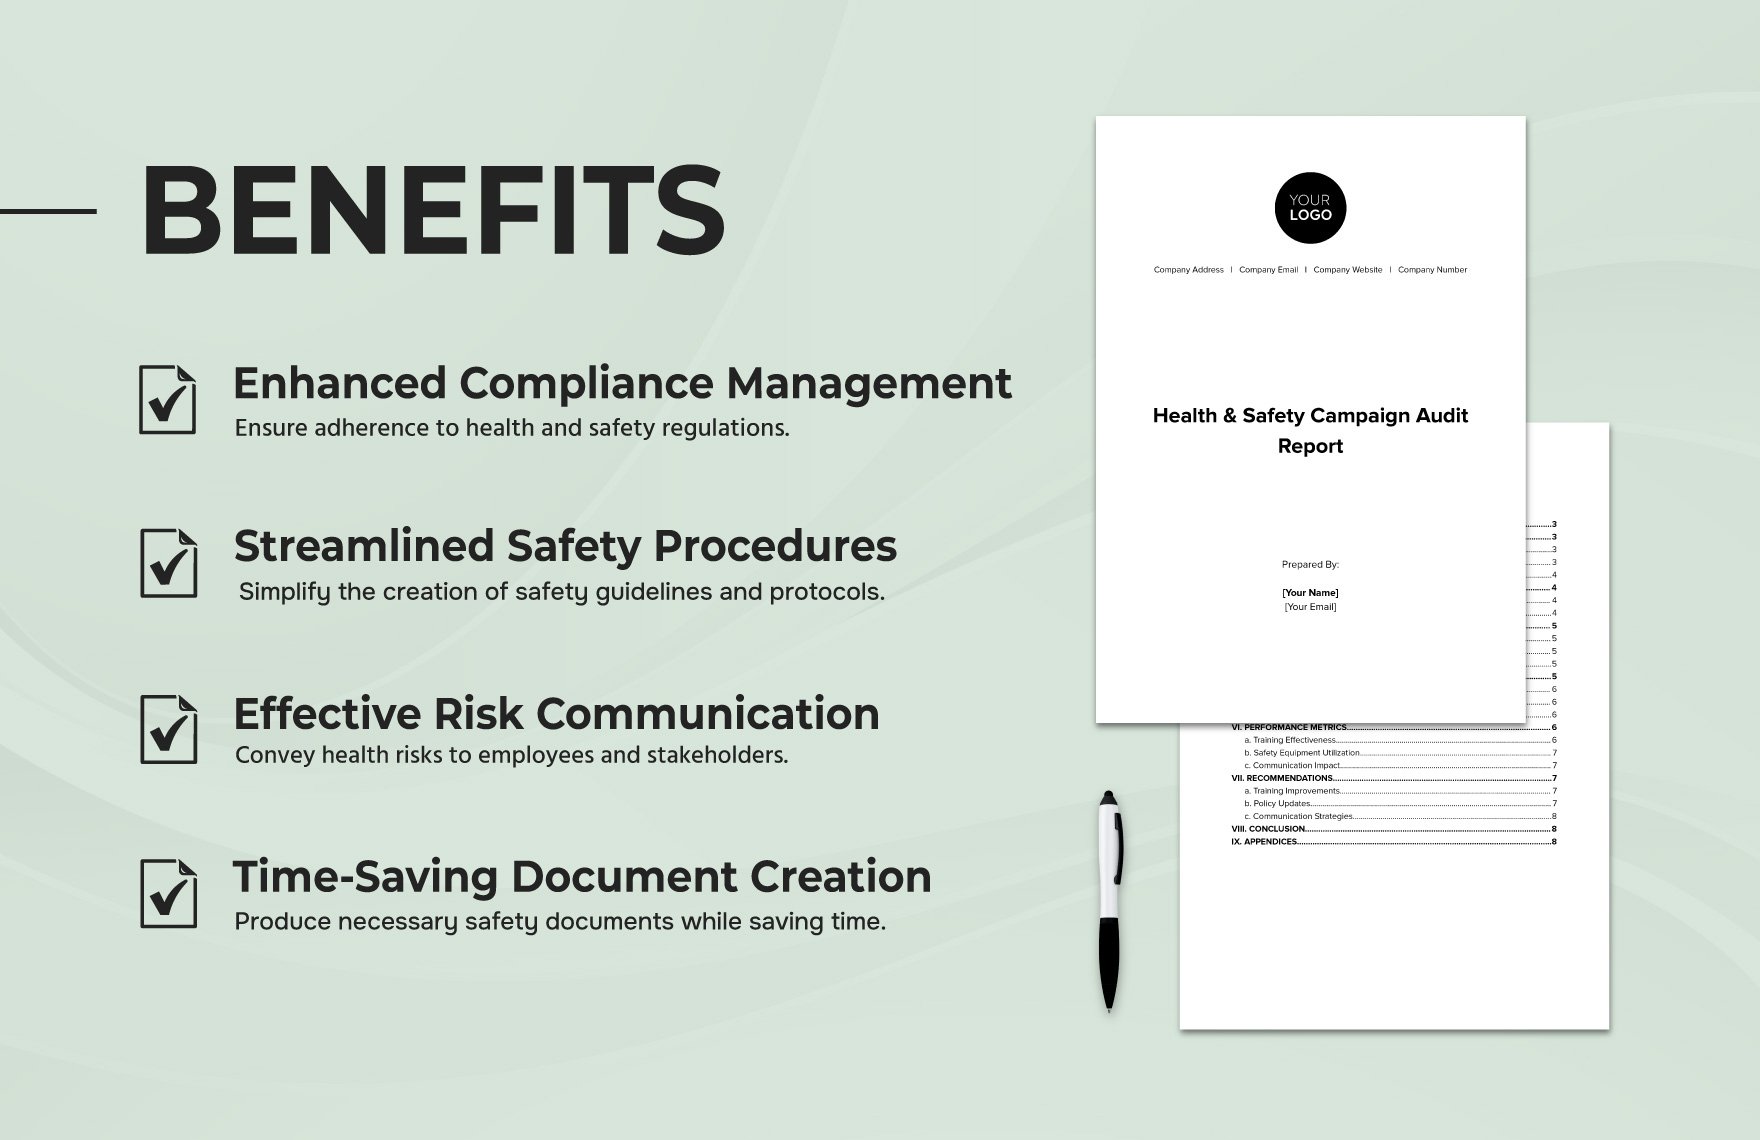 Health Safety Campaign Audit Report Template